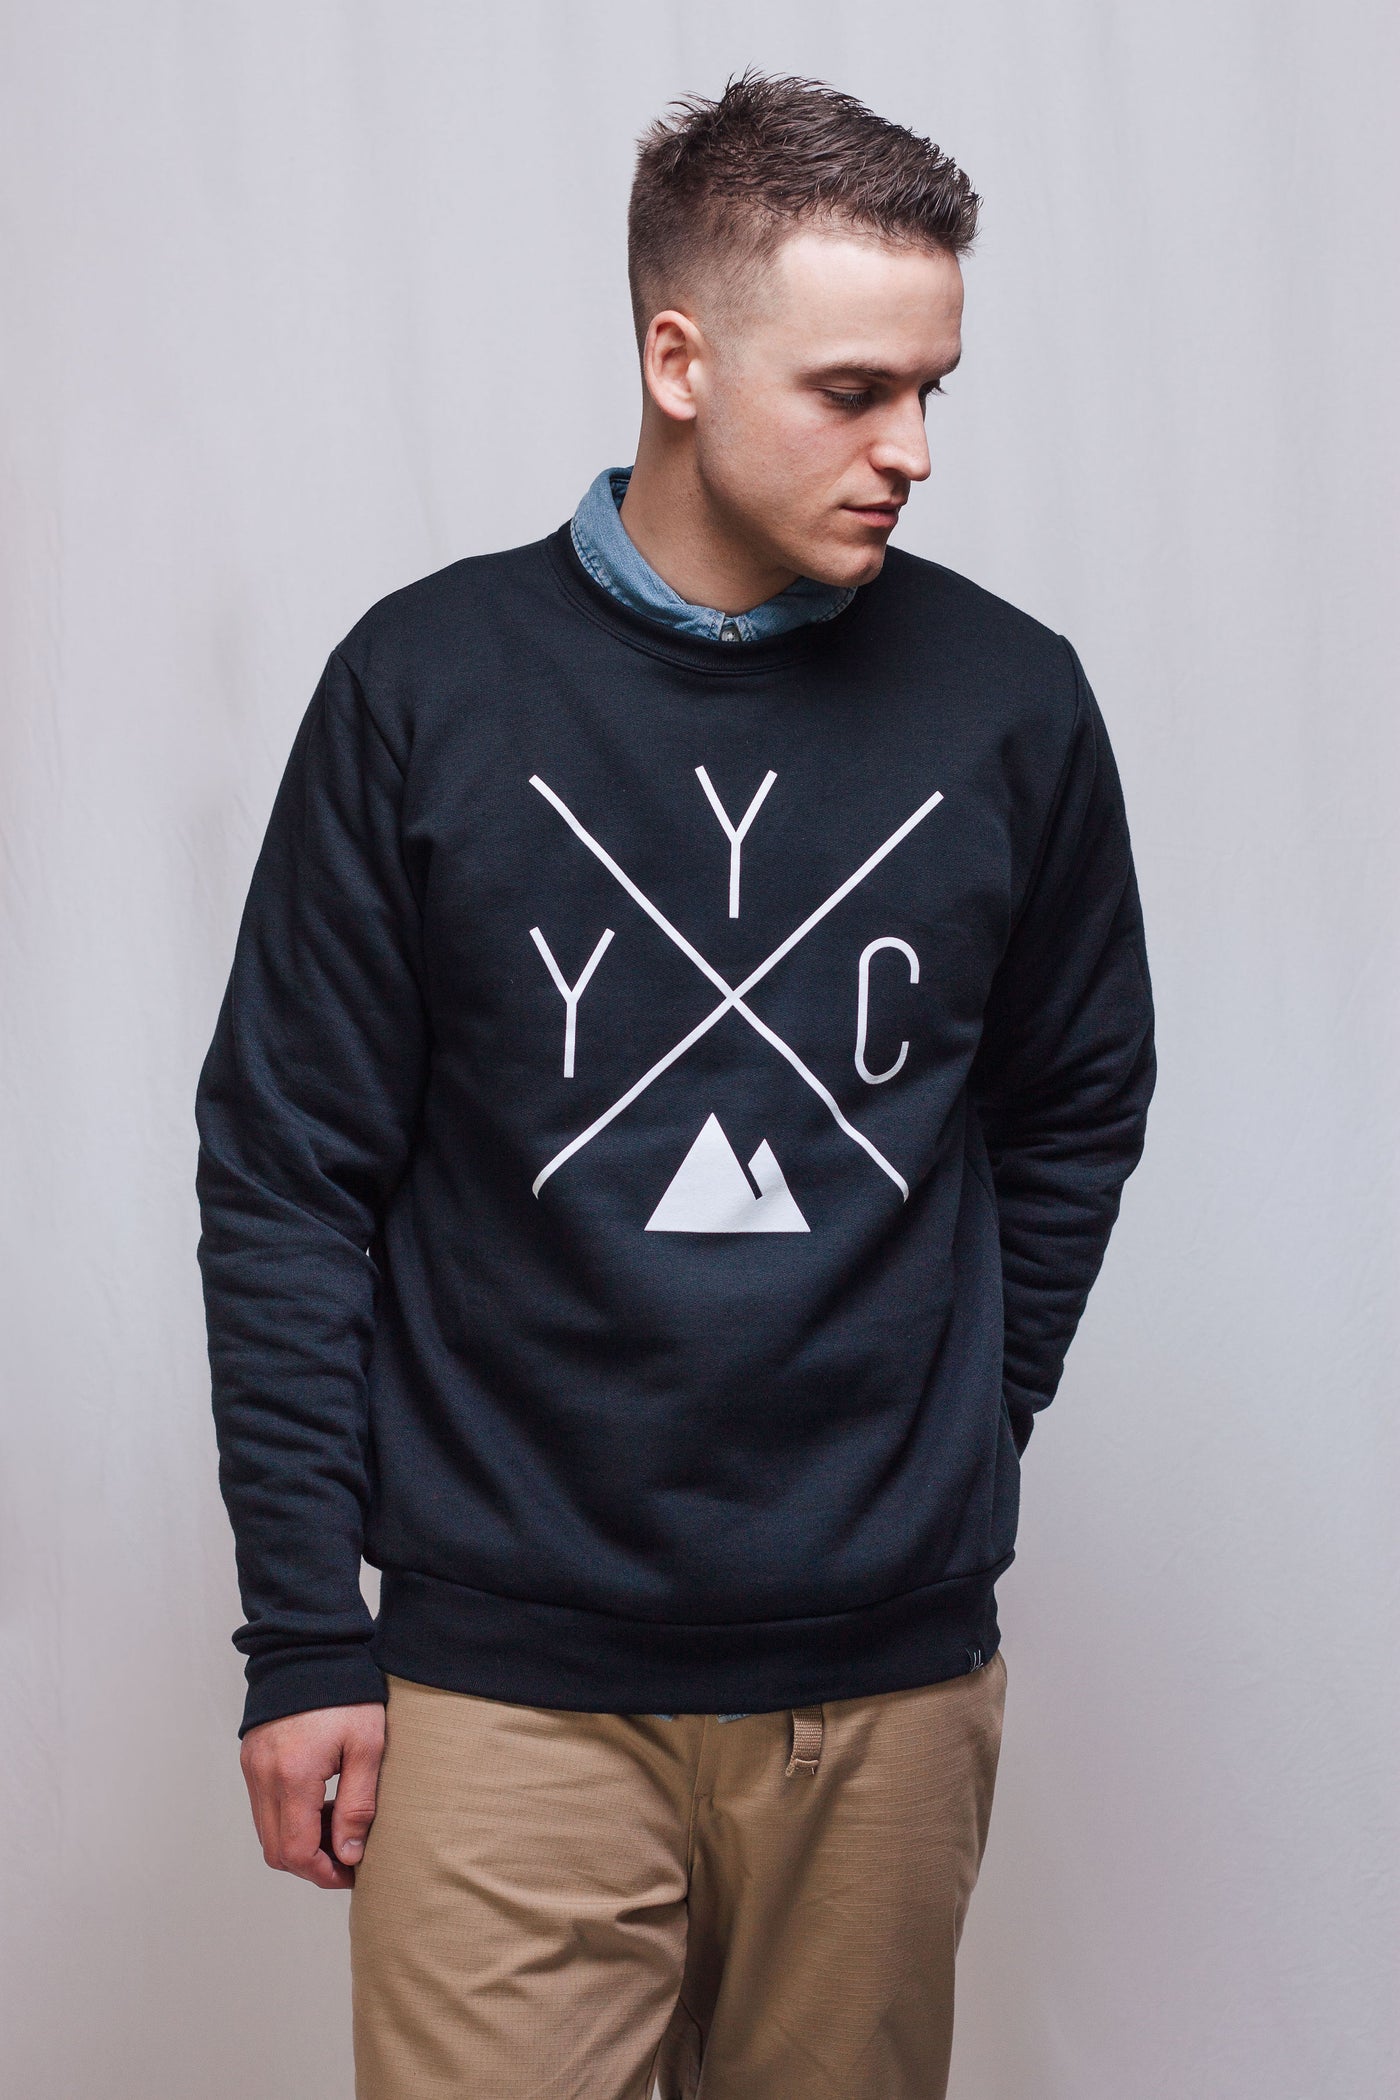 Individual wearing the YYC Crewneck sweater by Local Laundry. Sustainably made in Canada.